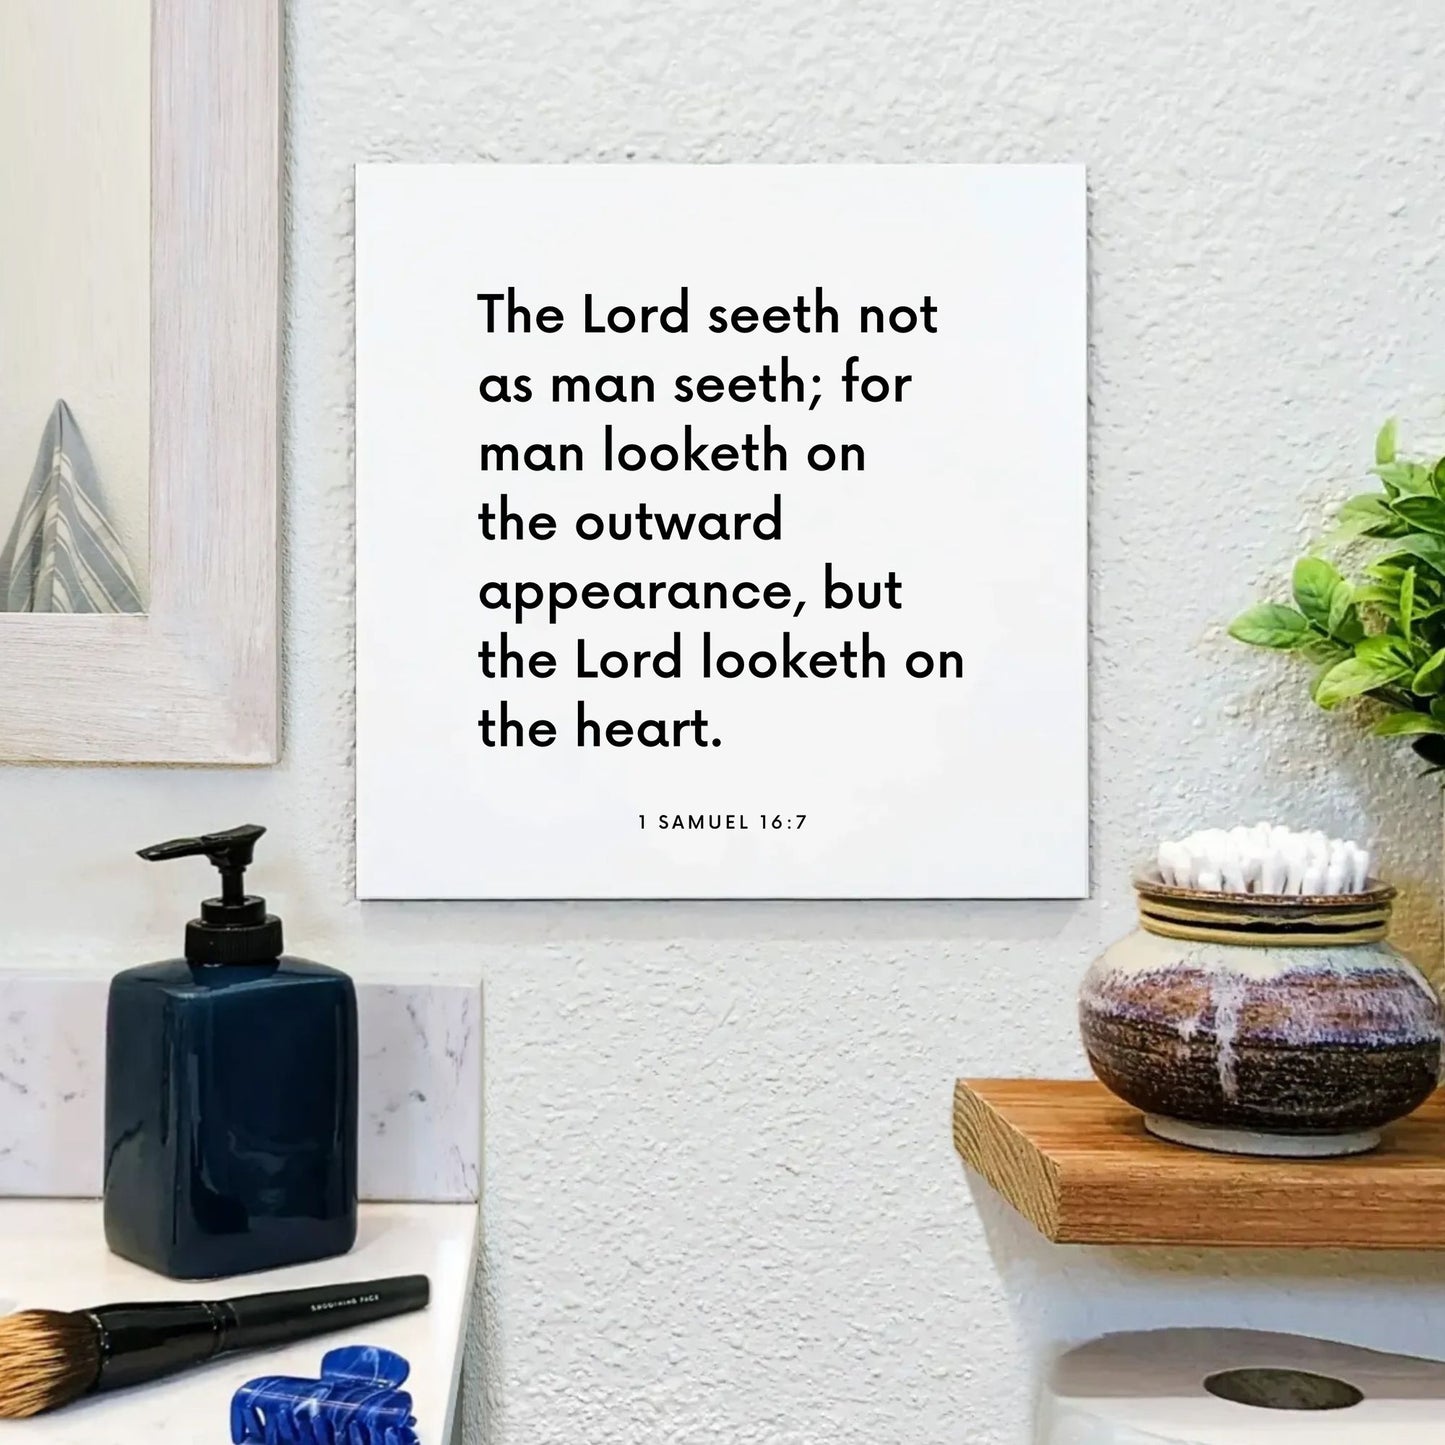 Bathroom mouting of the scripture tile for 1 Samuel 16:7 - "The Lord seeth not as man seeth"